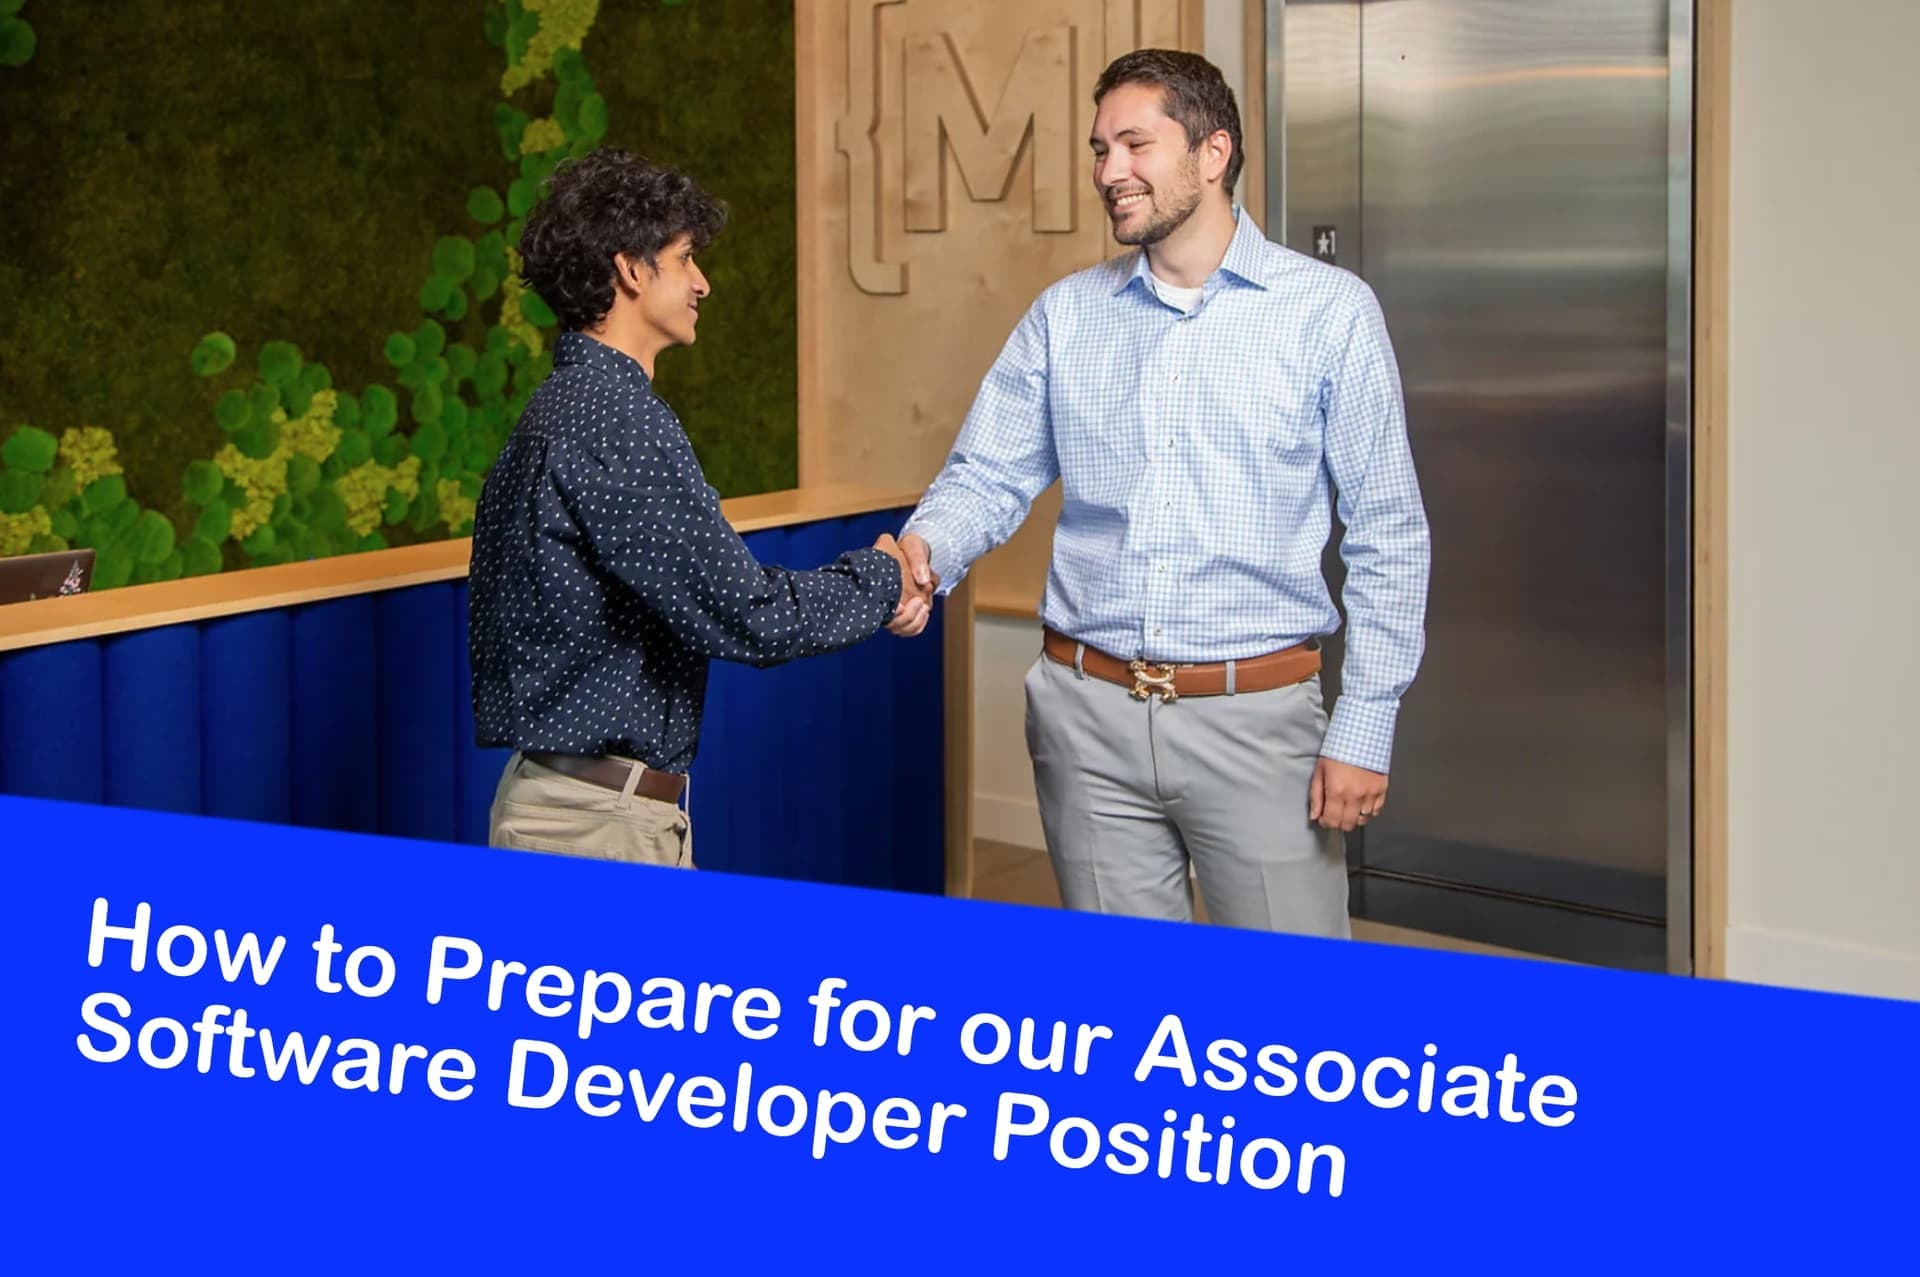 How to Prepare for our Associate Software Developer Position